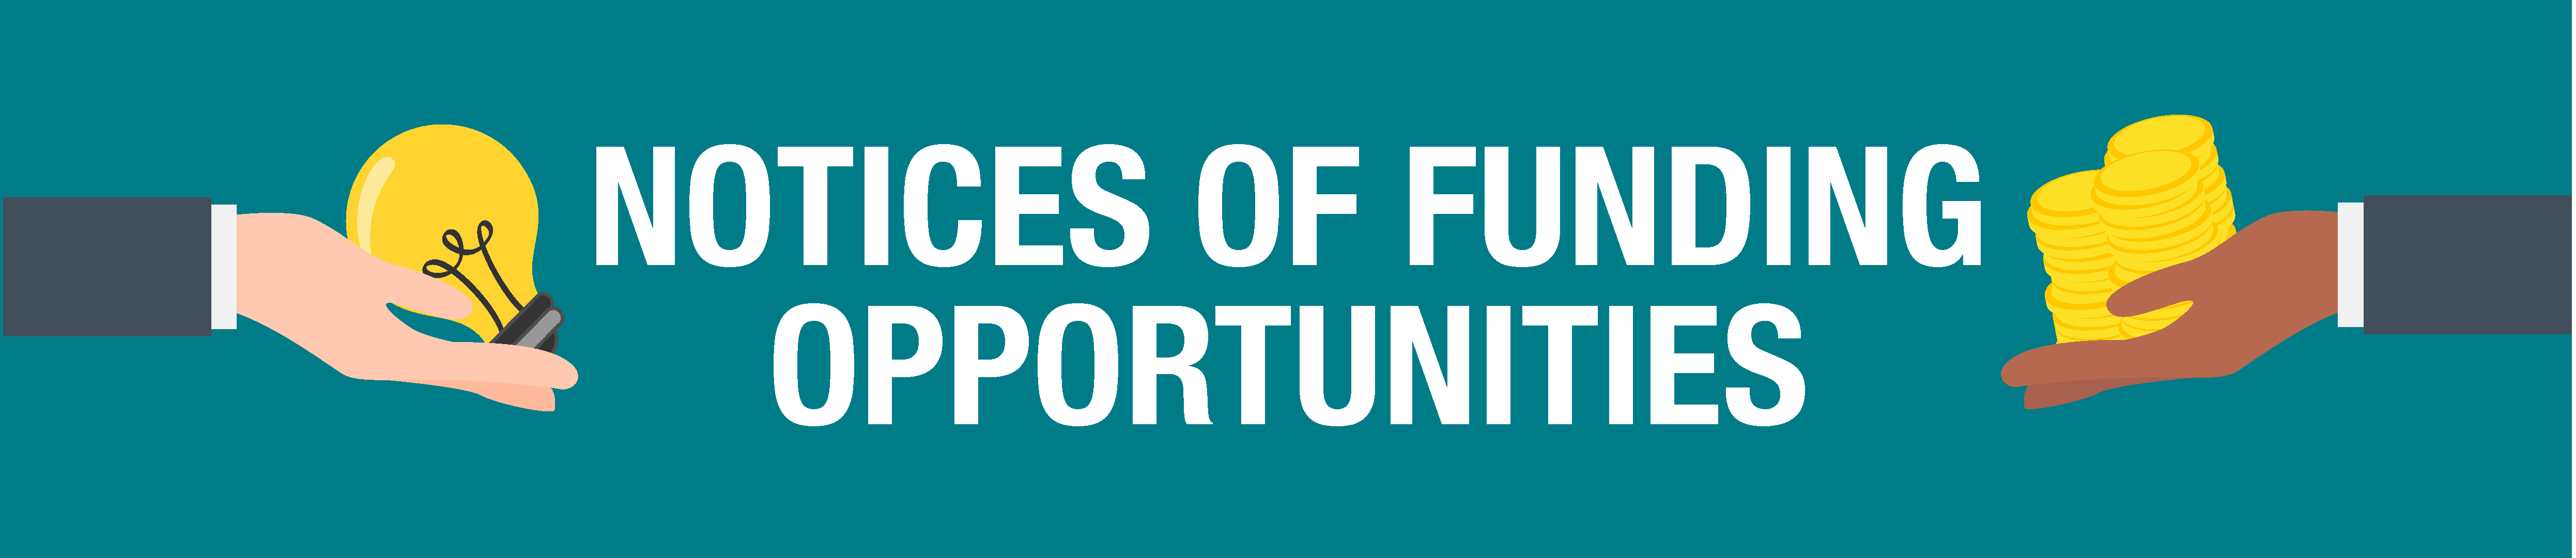 Notice of Funding Opportunities Banner Image